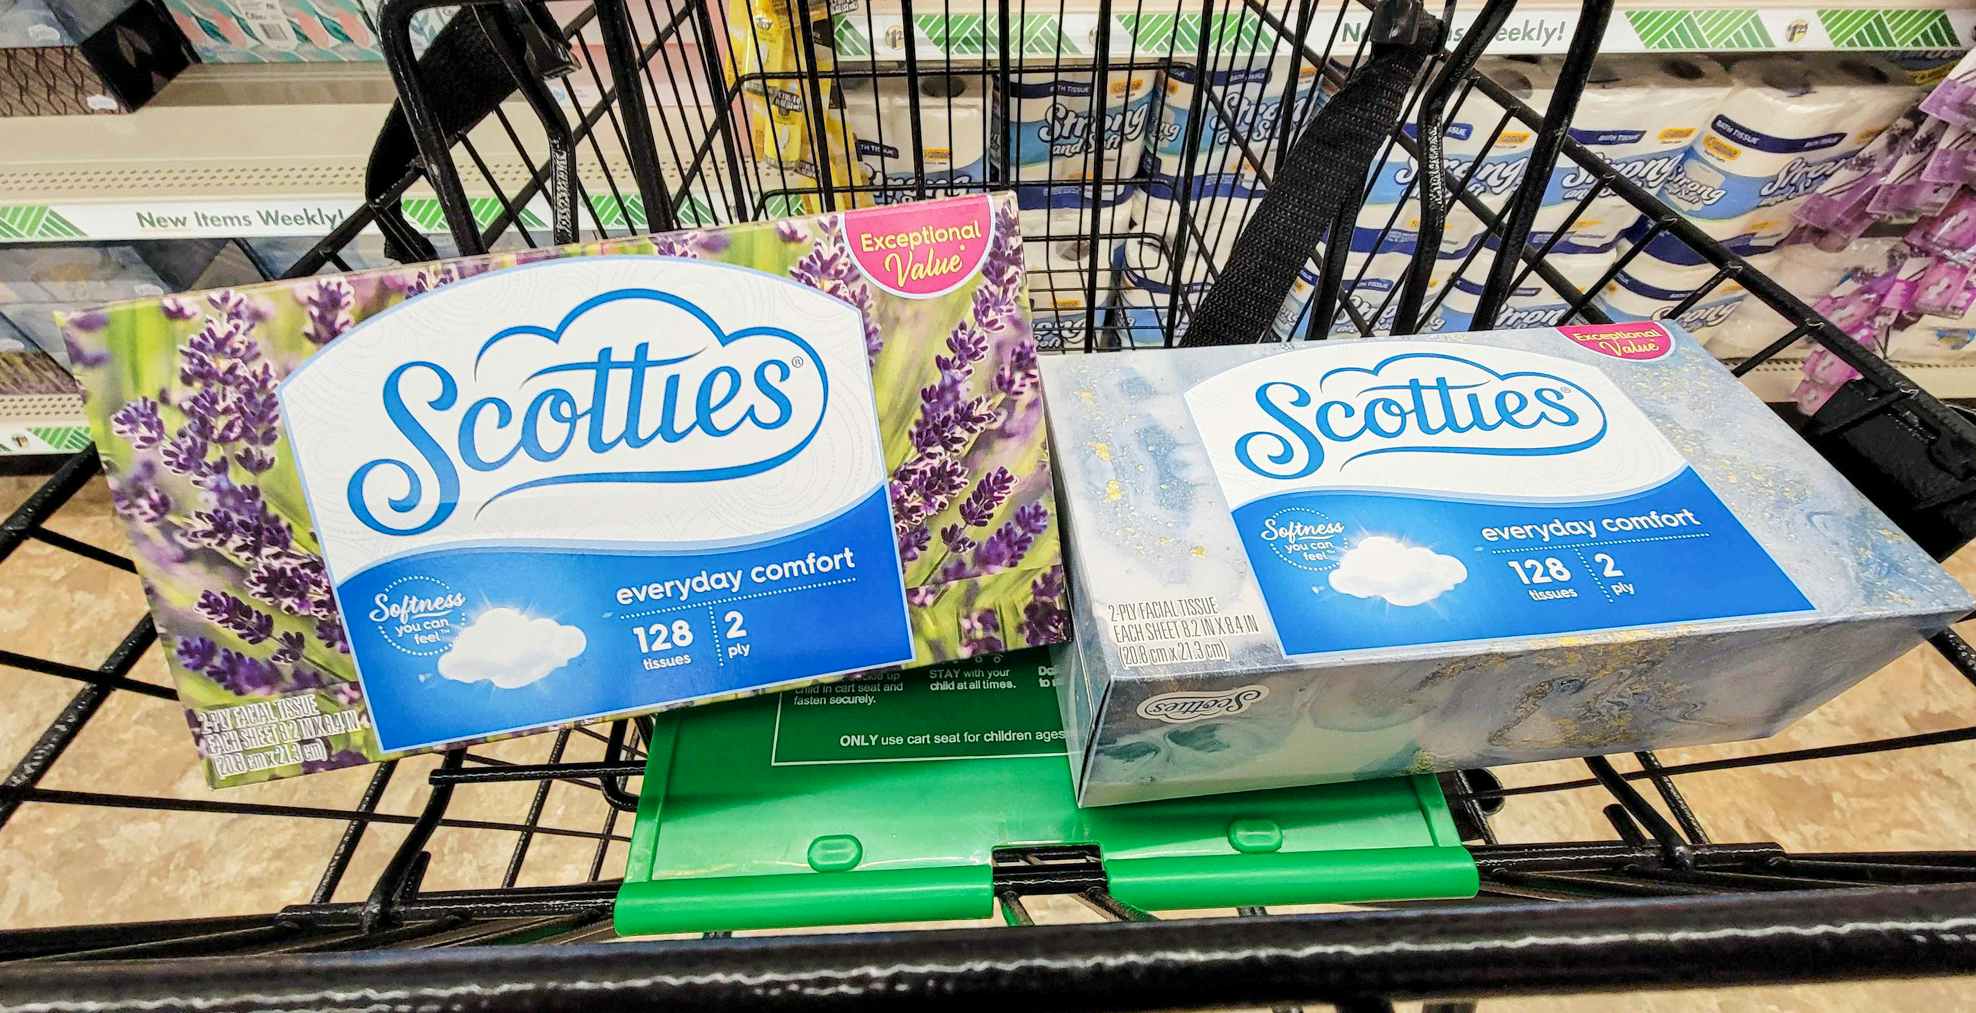 2 boxes of scotties tissues in a cart